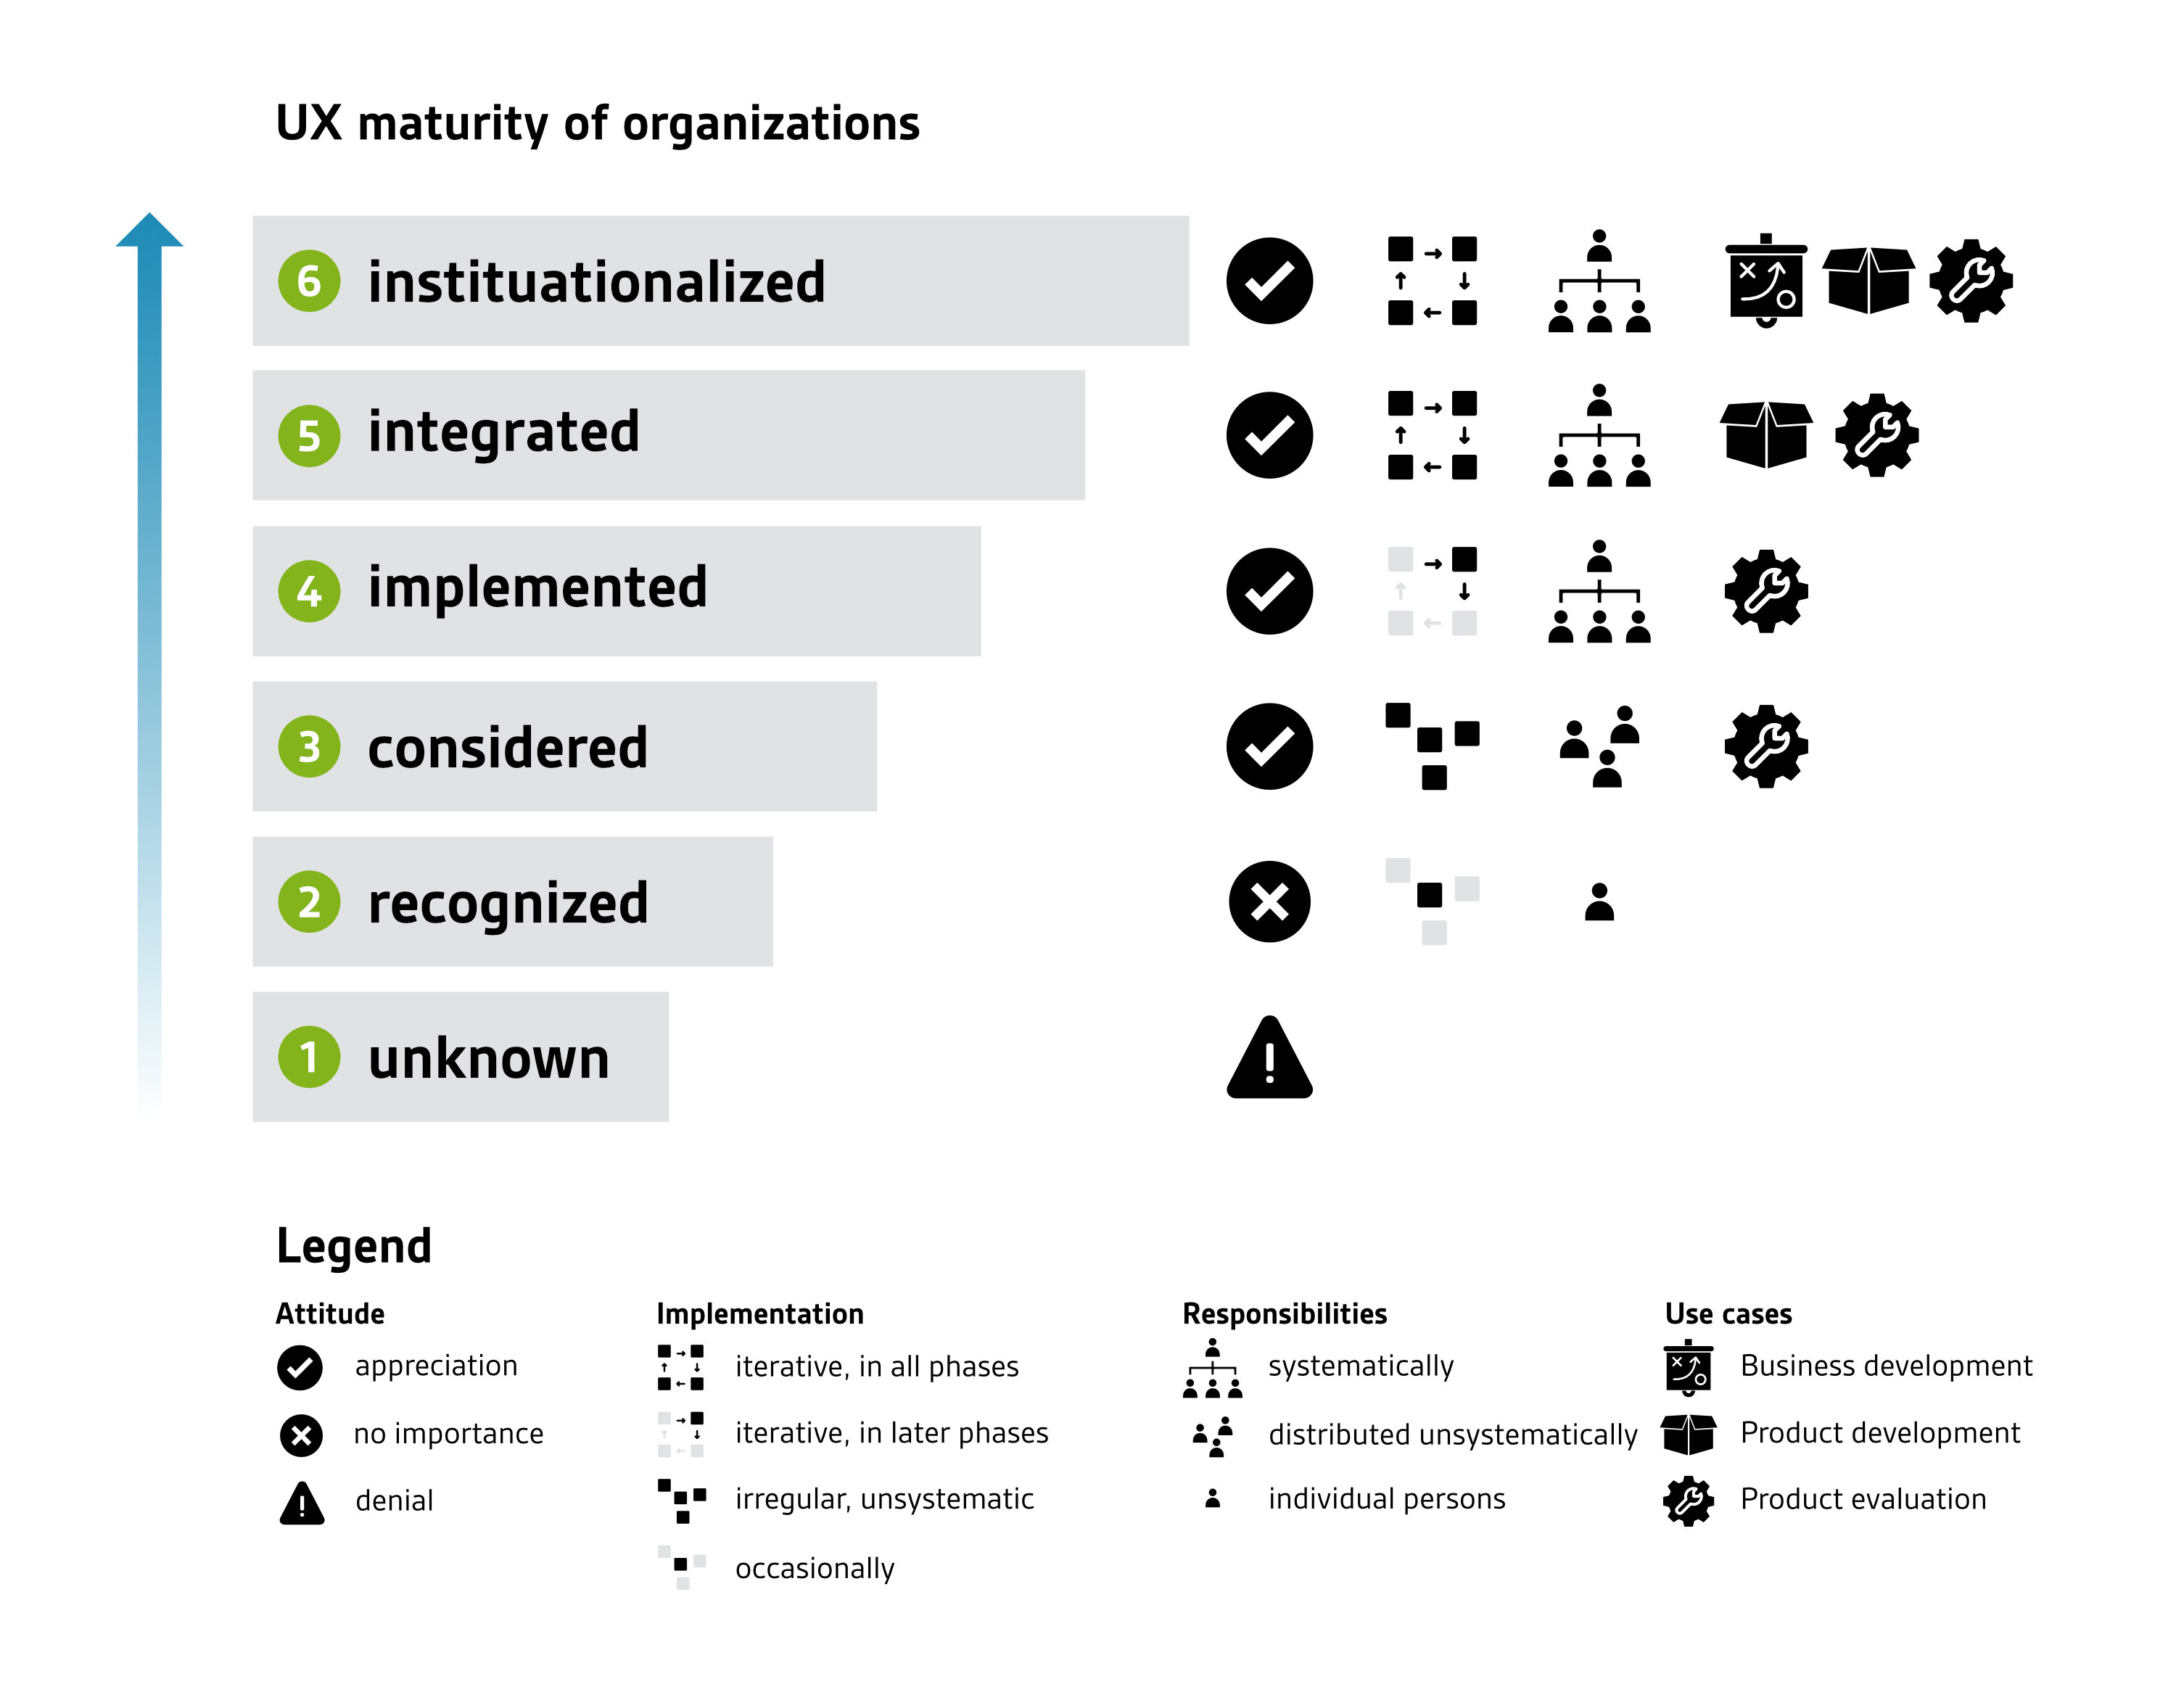 Key elements of several UX maturity levels, see main text for explanations